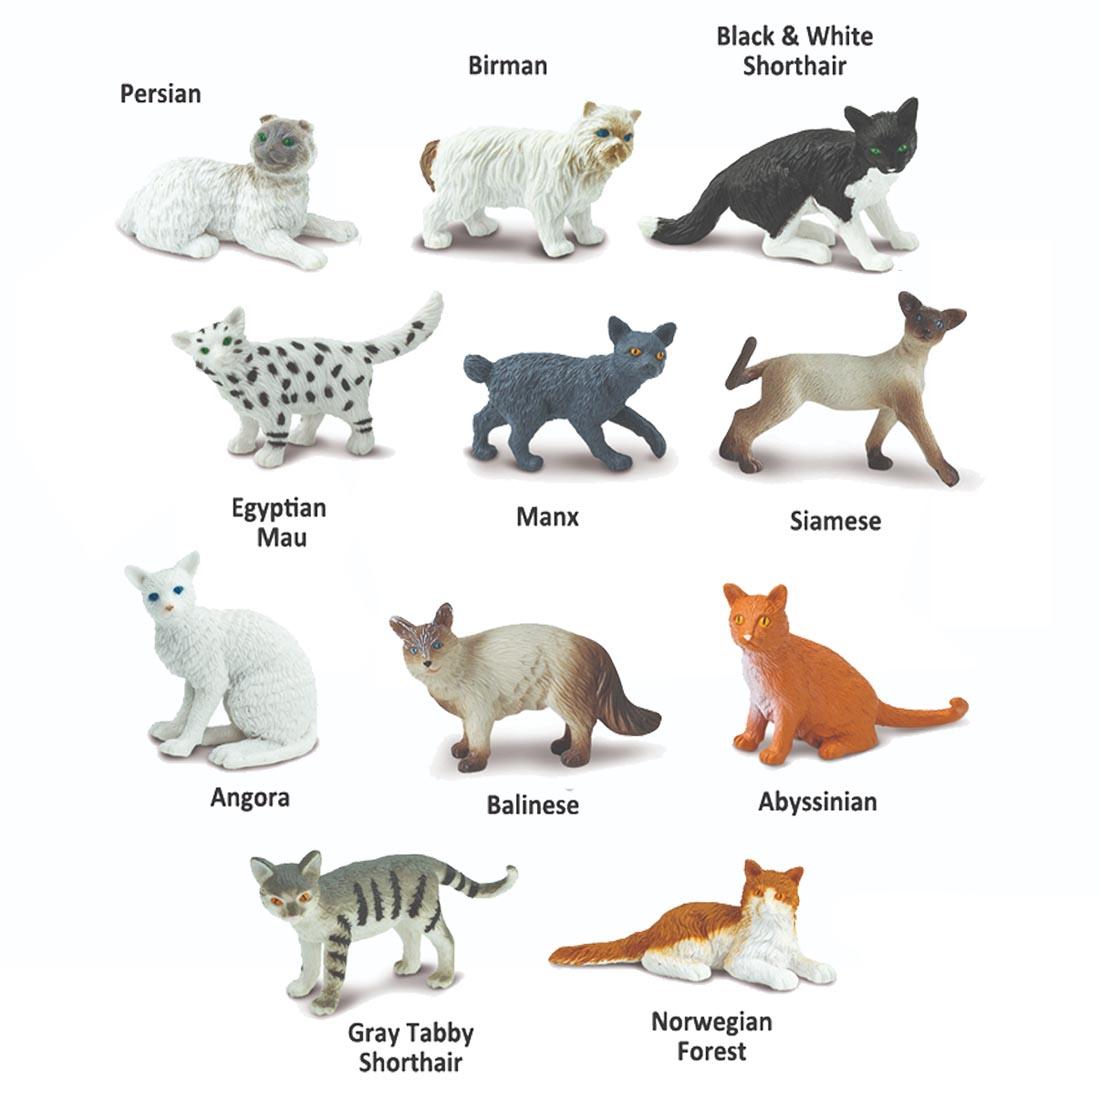 11 pieces from the Domestic Cats Figurine Set labeled with their names: Persian, Birman, Black & White Shorthair, Egyptian Mau, Manx, Siamese, Angora, Balinese, Abyssinian, Gray Tabby, Norwegian Fore